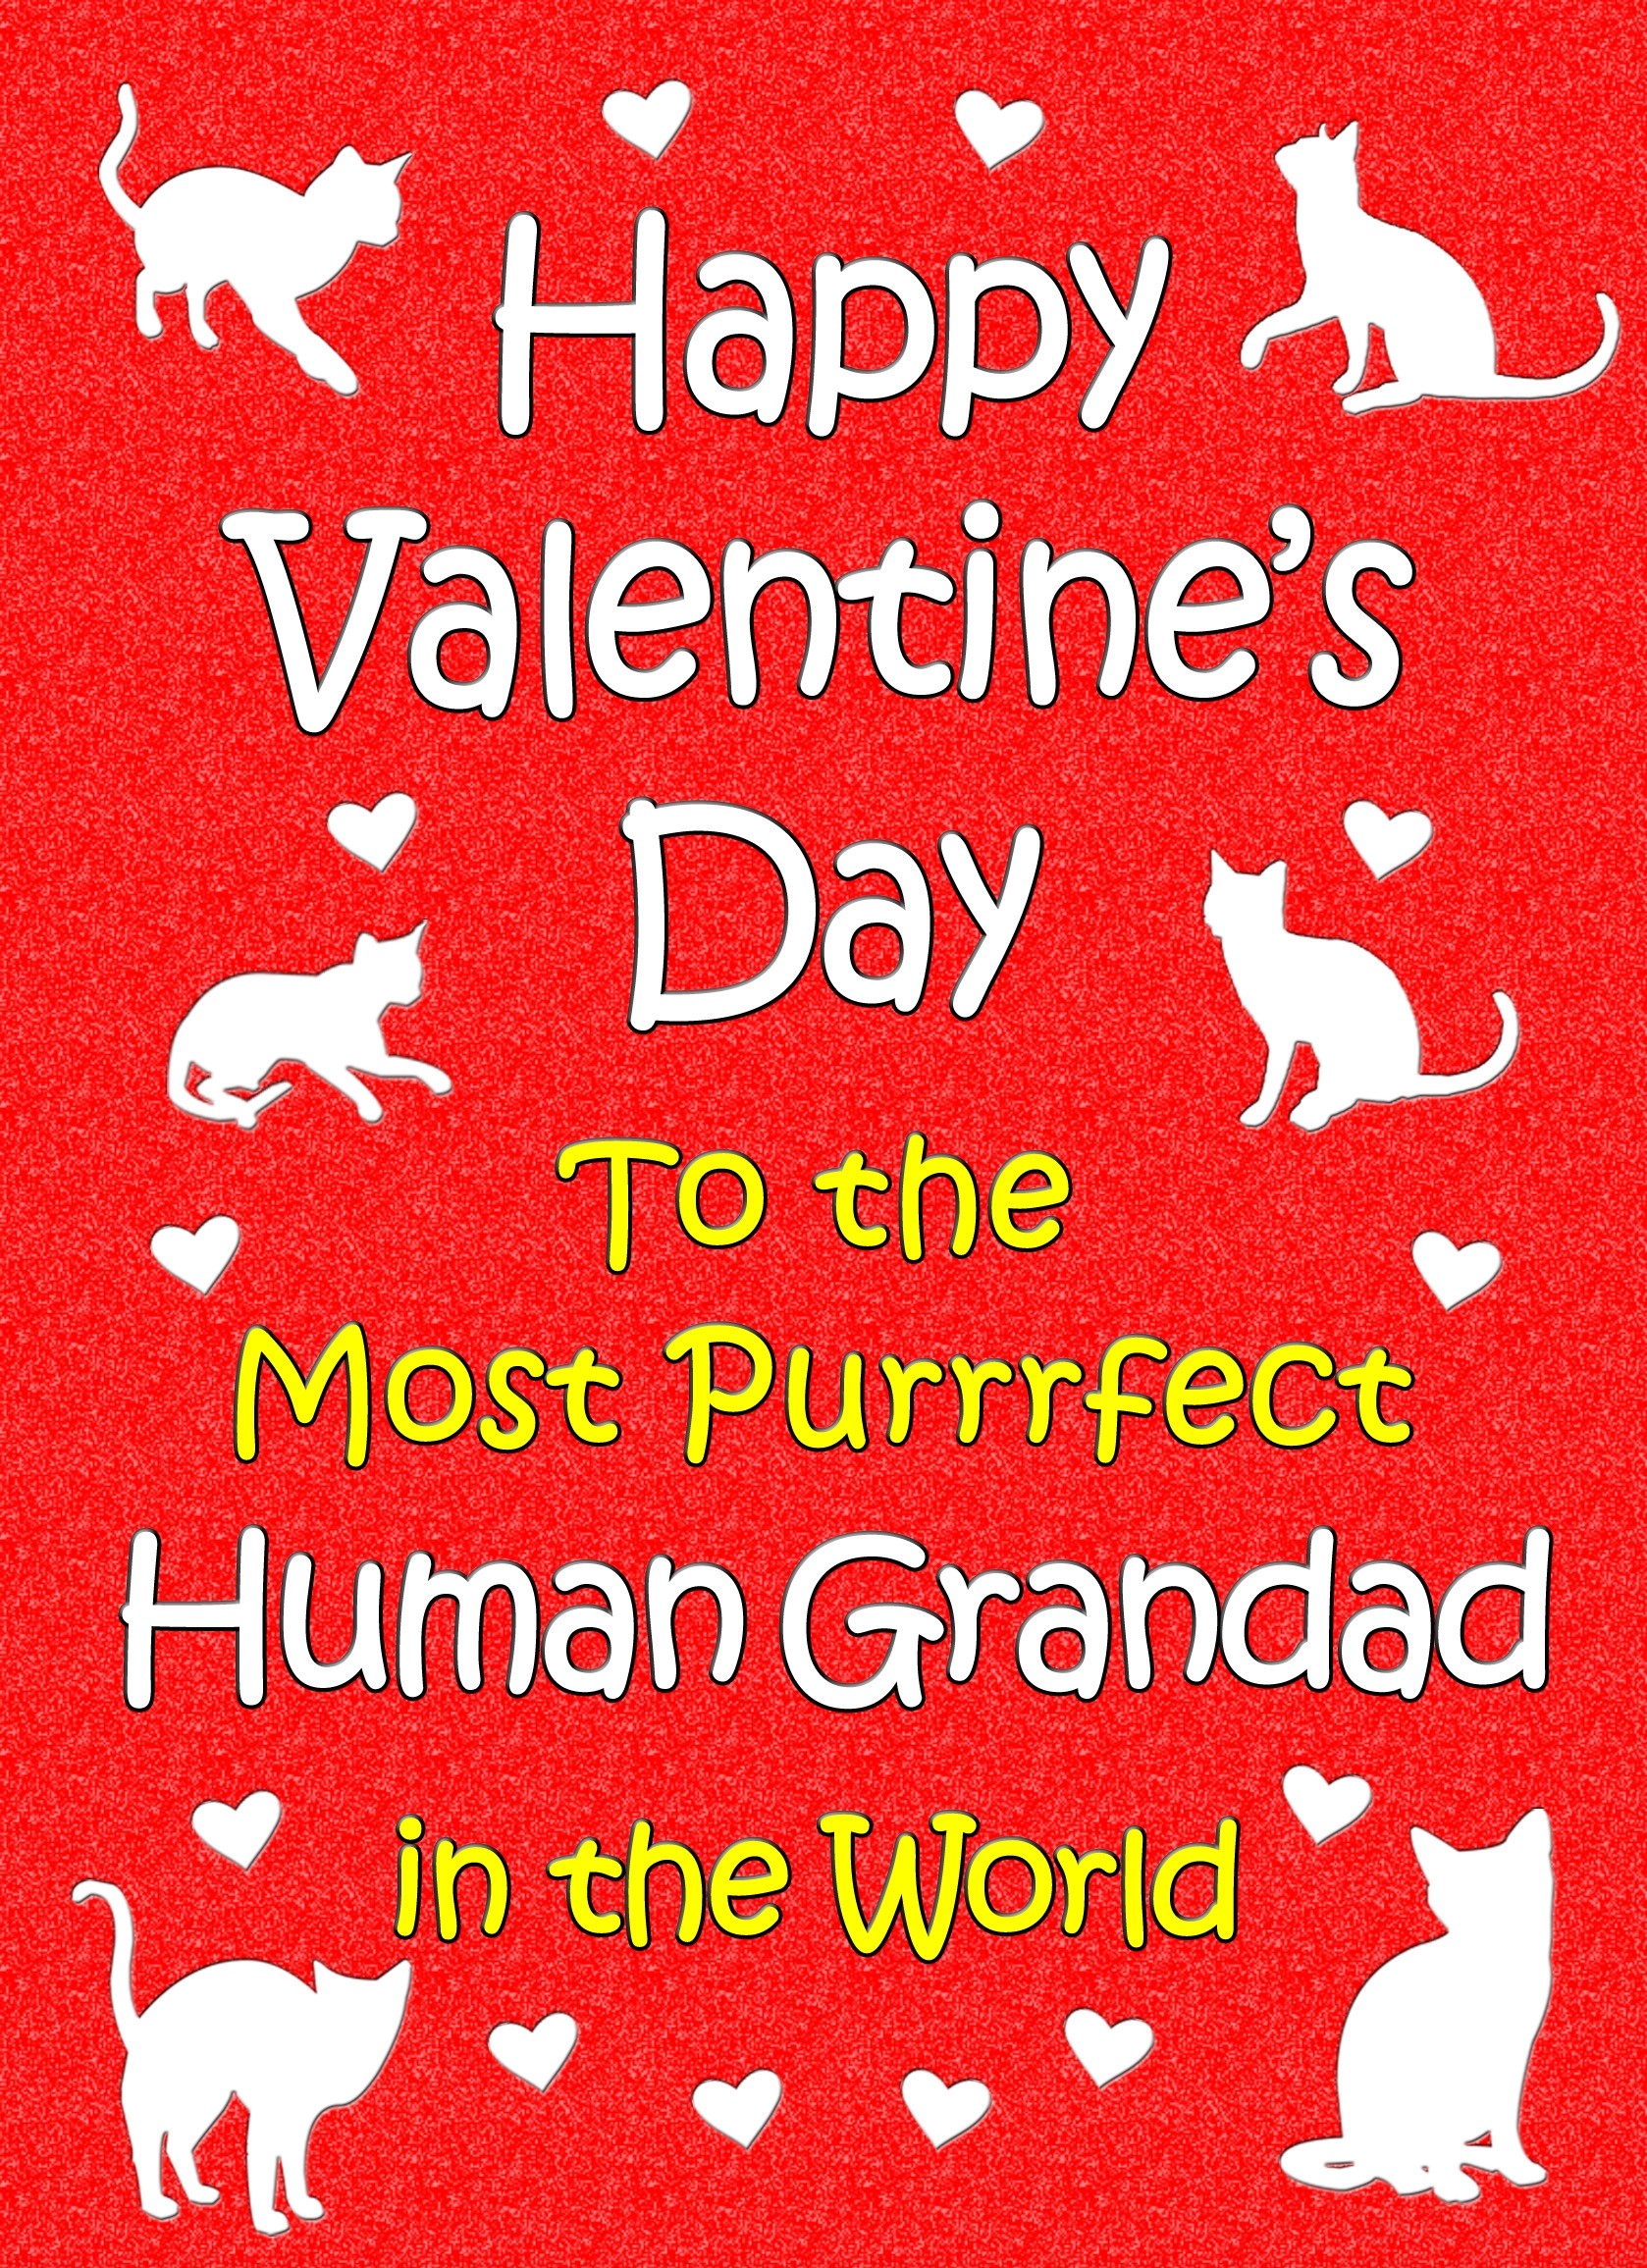 From The Cat Valentines Day Card (Human Grandad)